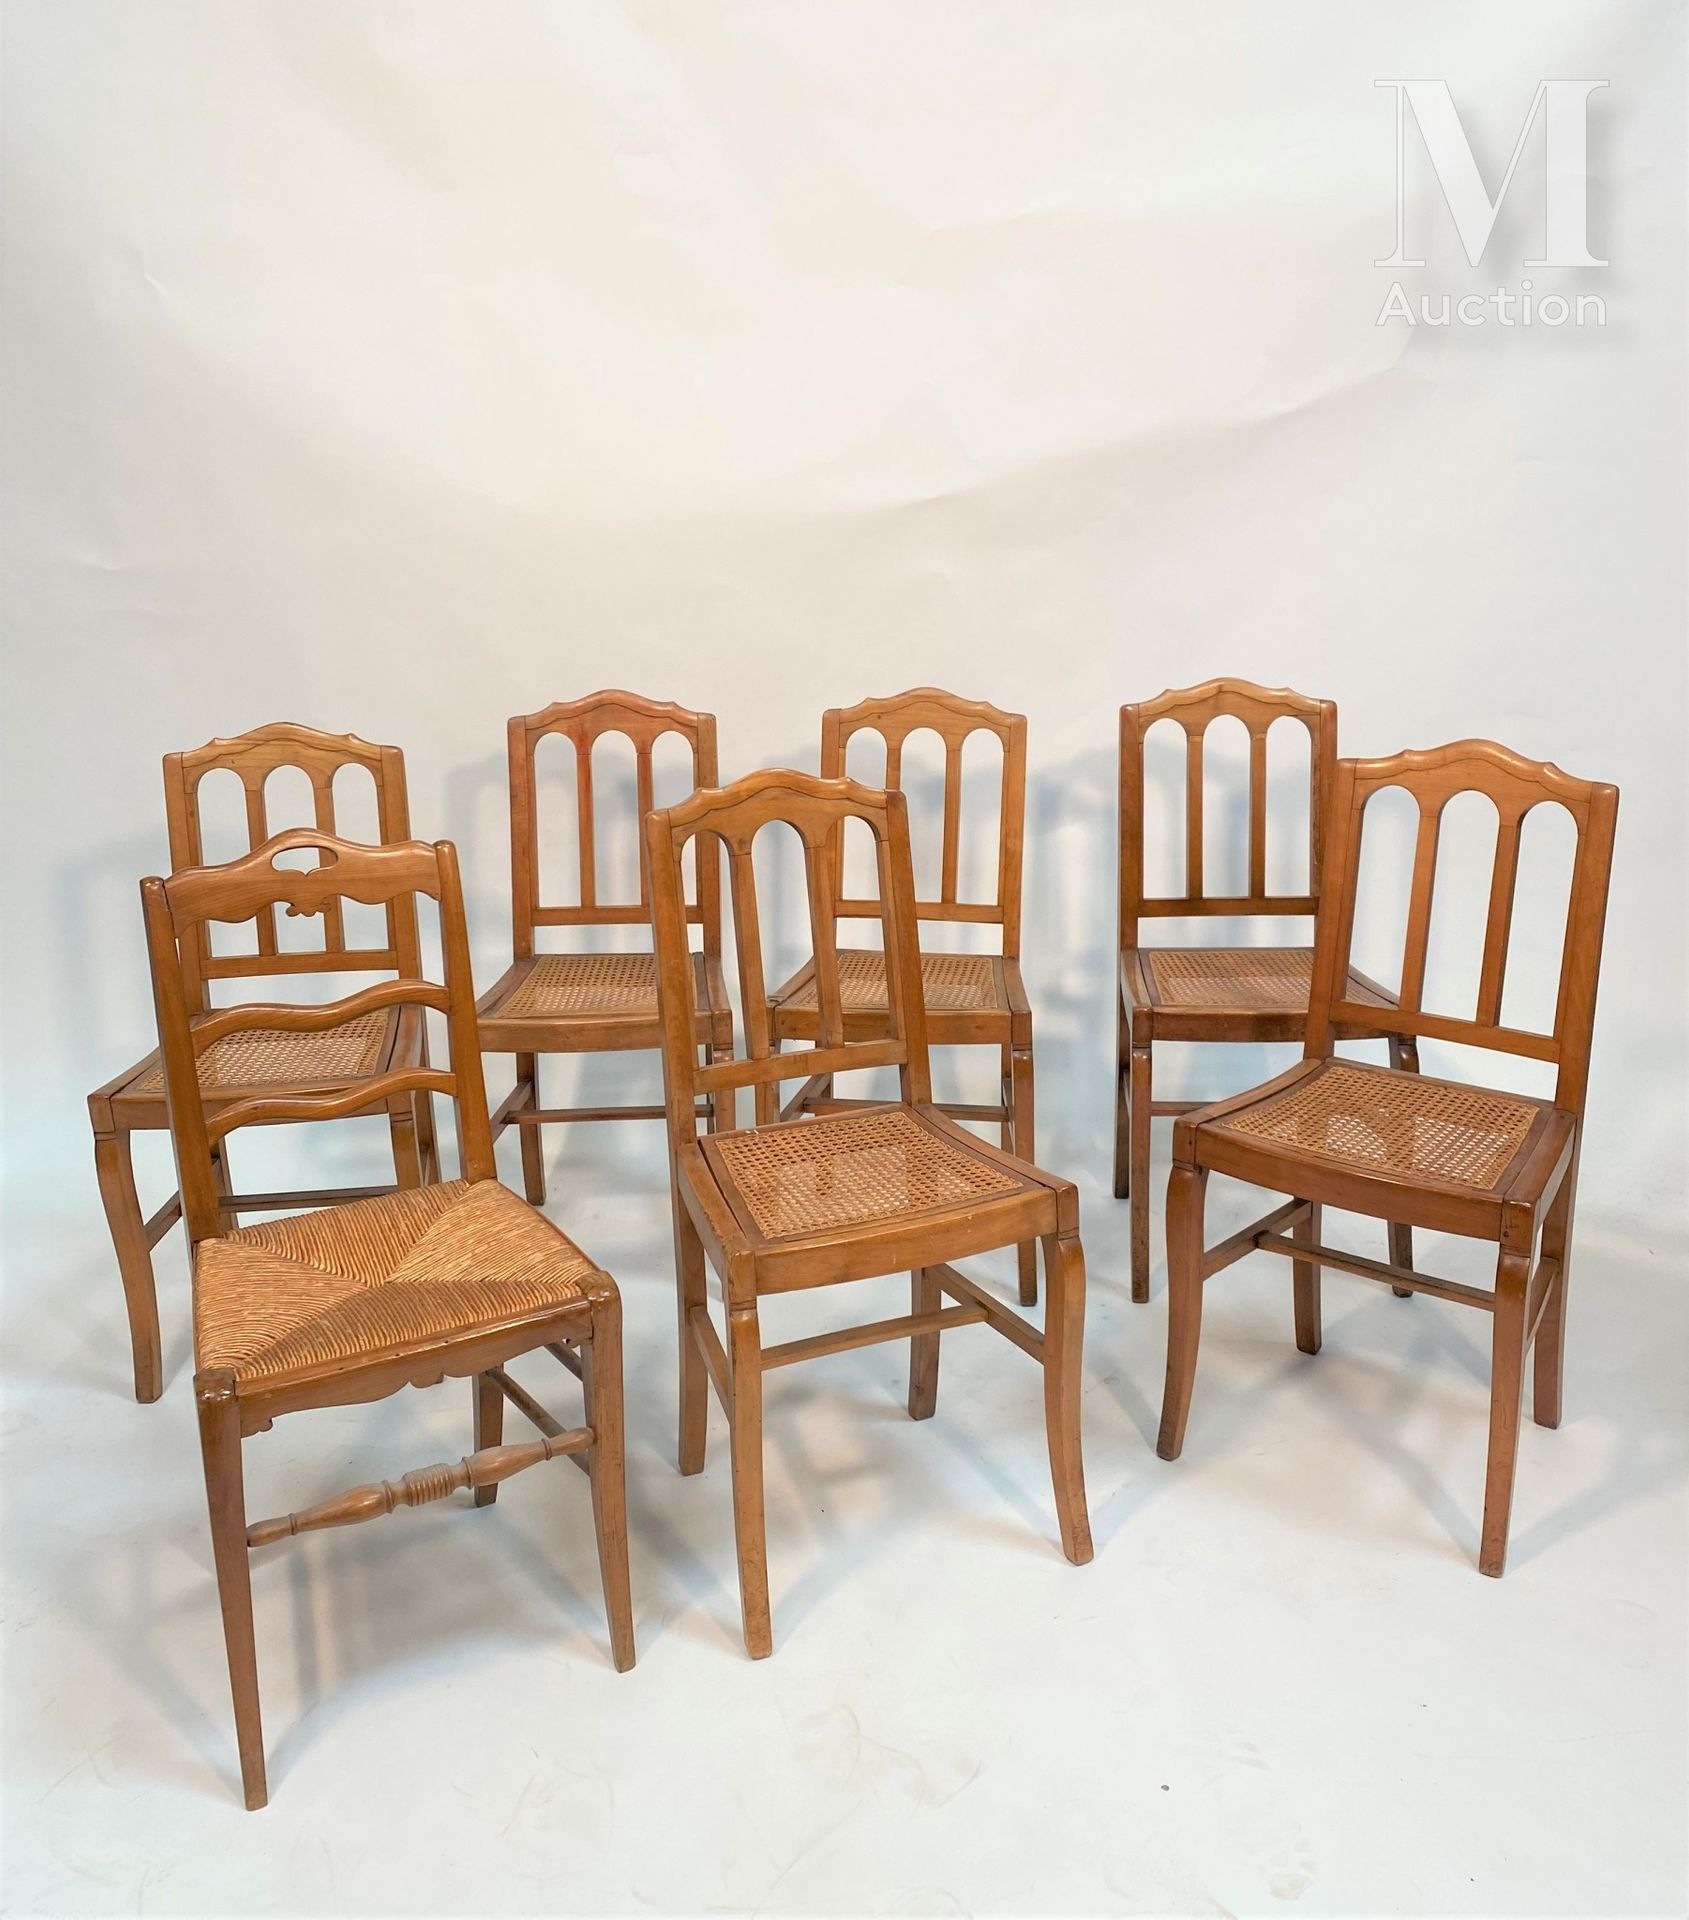 ENSEMBLE DE SIX CHAISES in natural wood with three arches on the back

A chair o&hellip;